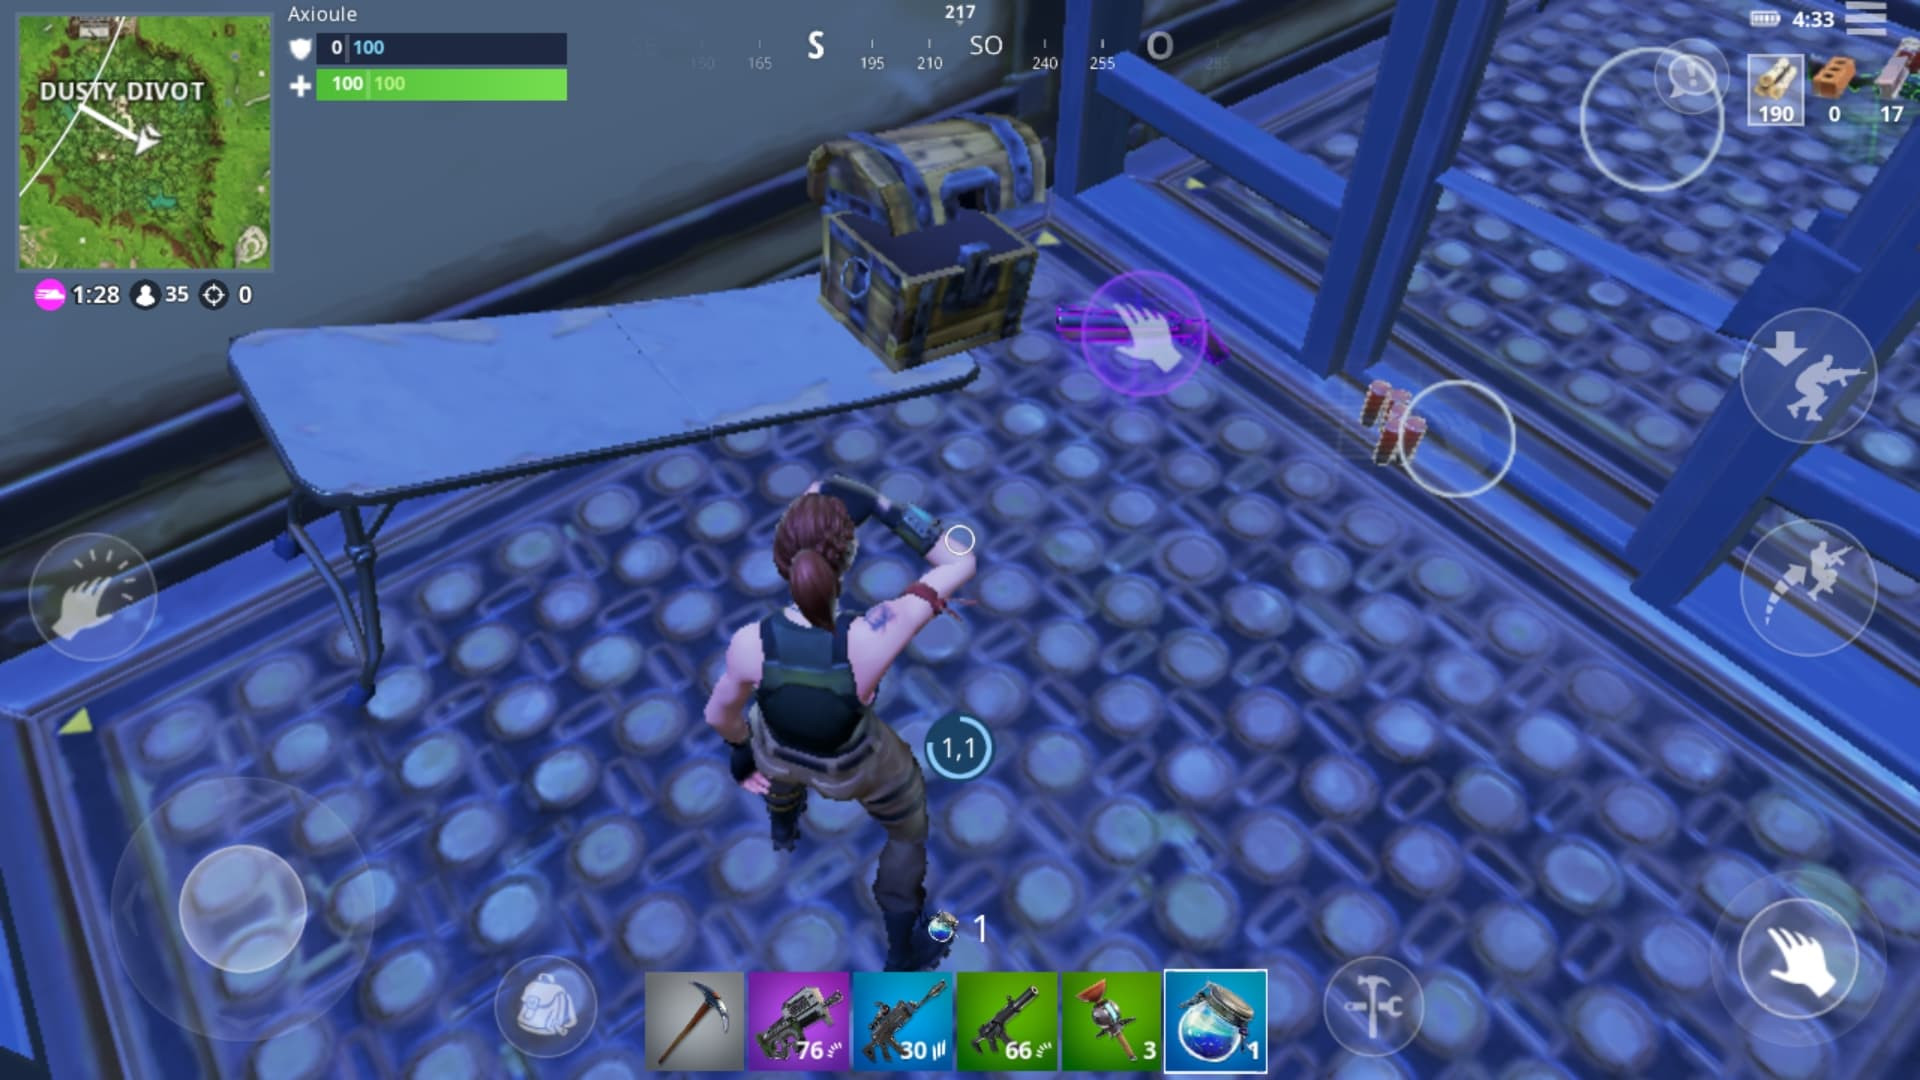 Telecharger Fortnite Apk Android Gratuit - screenshoot fortnite test android